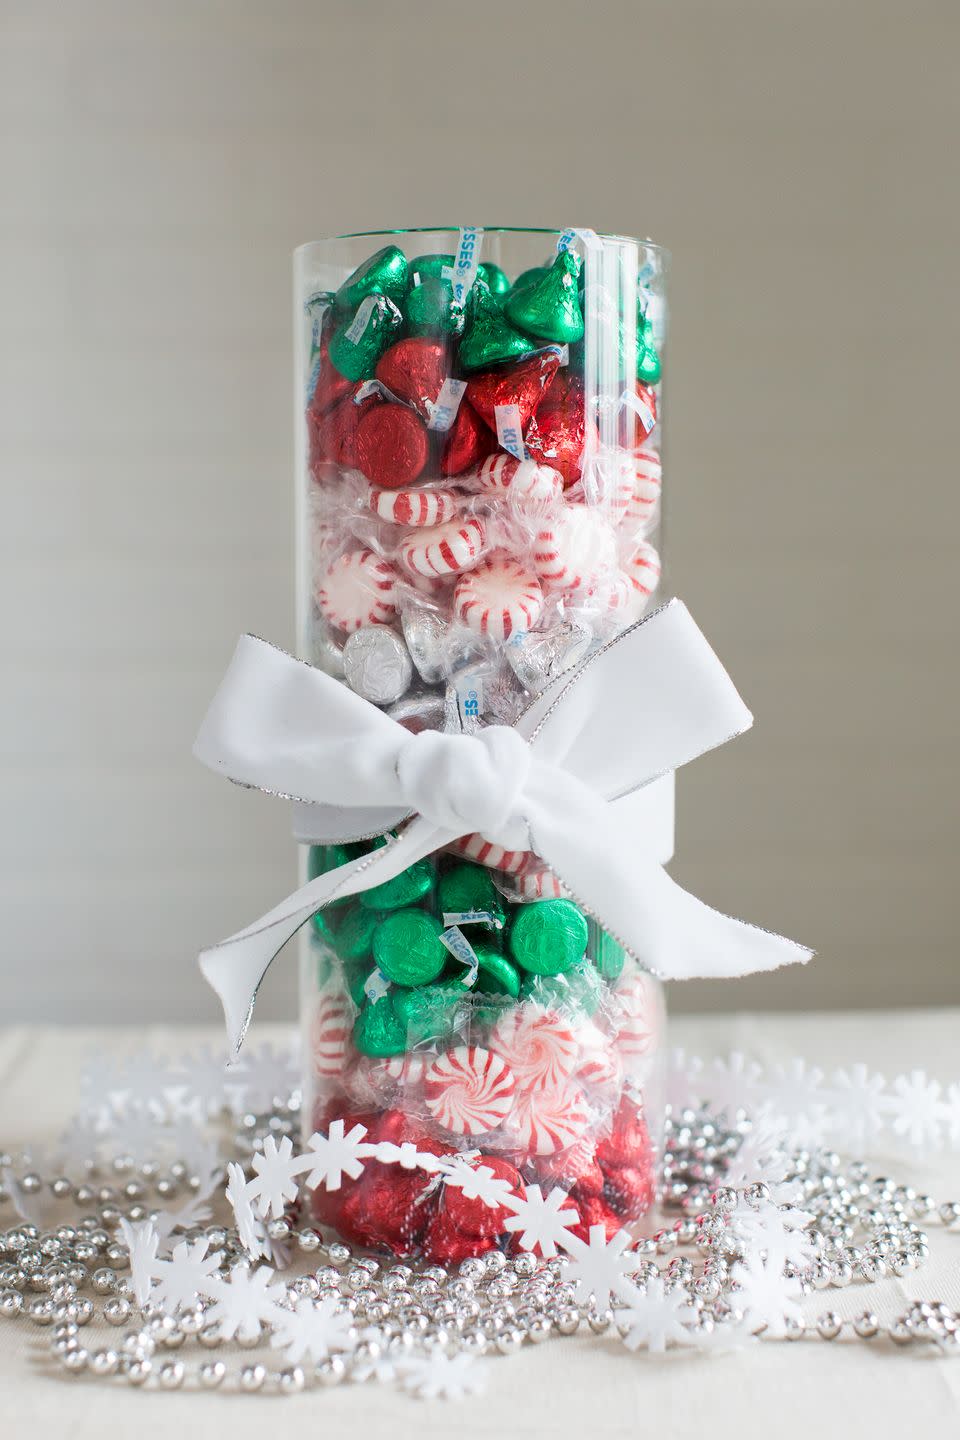 Make a Candy-coated Centerpiece